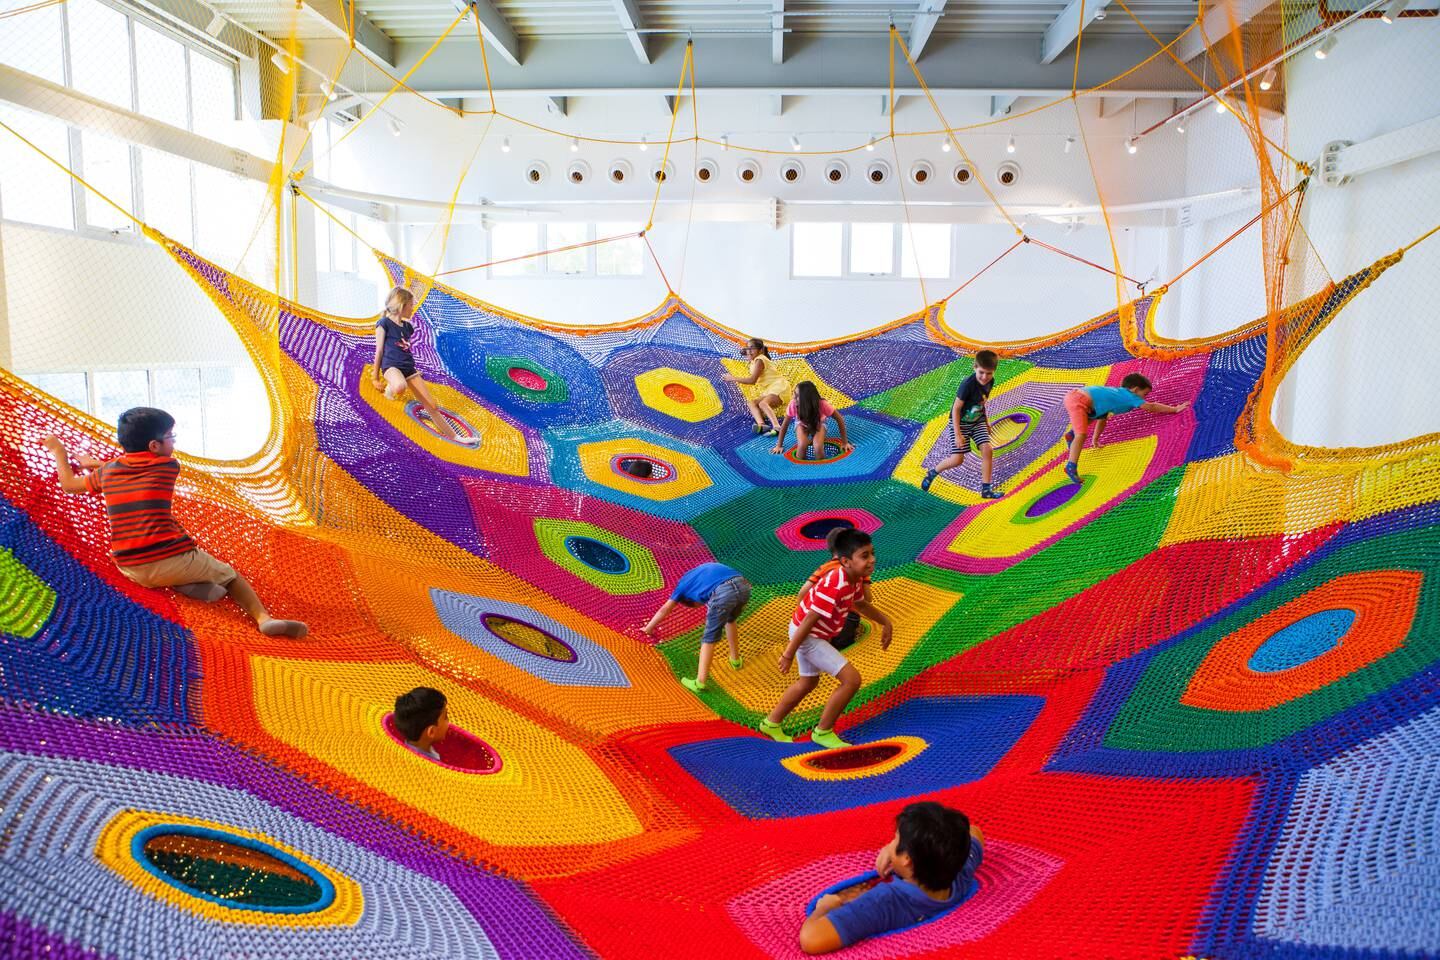 The indoor playground features eight galleries with various activities to keep children engaged. Photo: OliOli